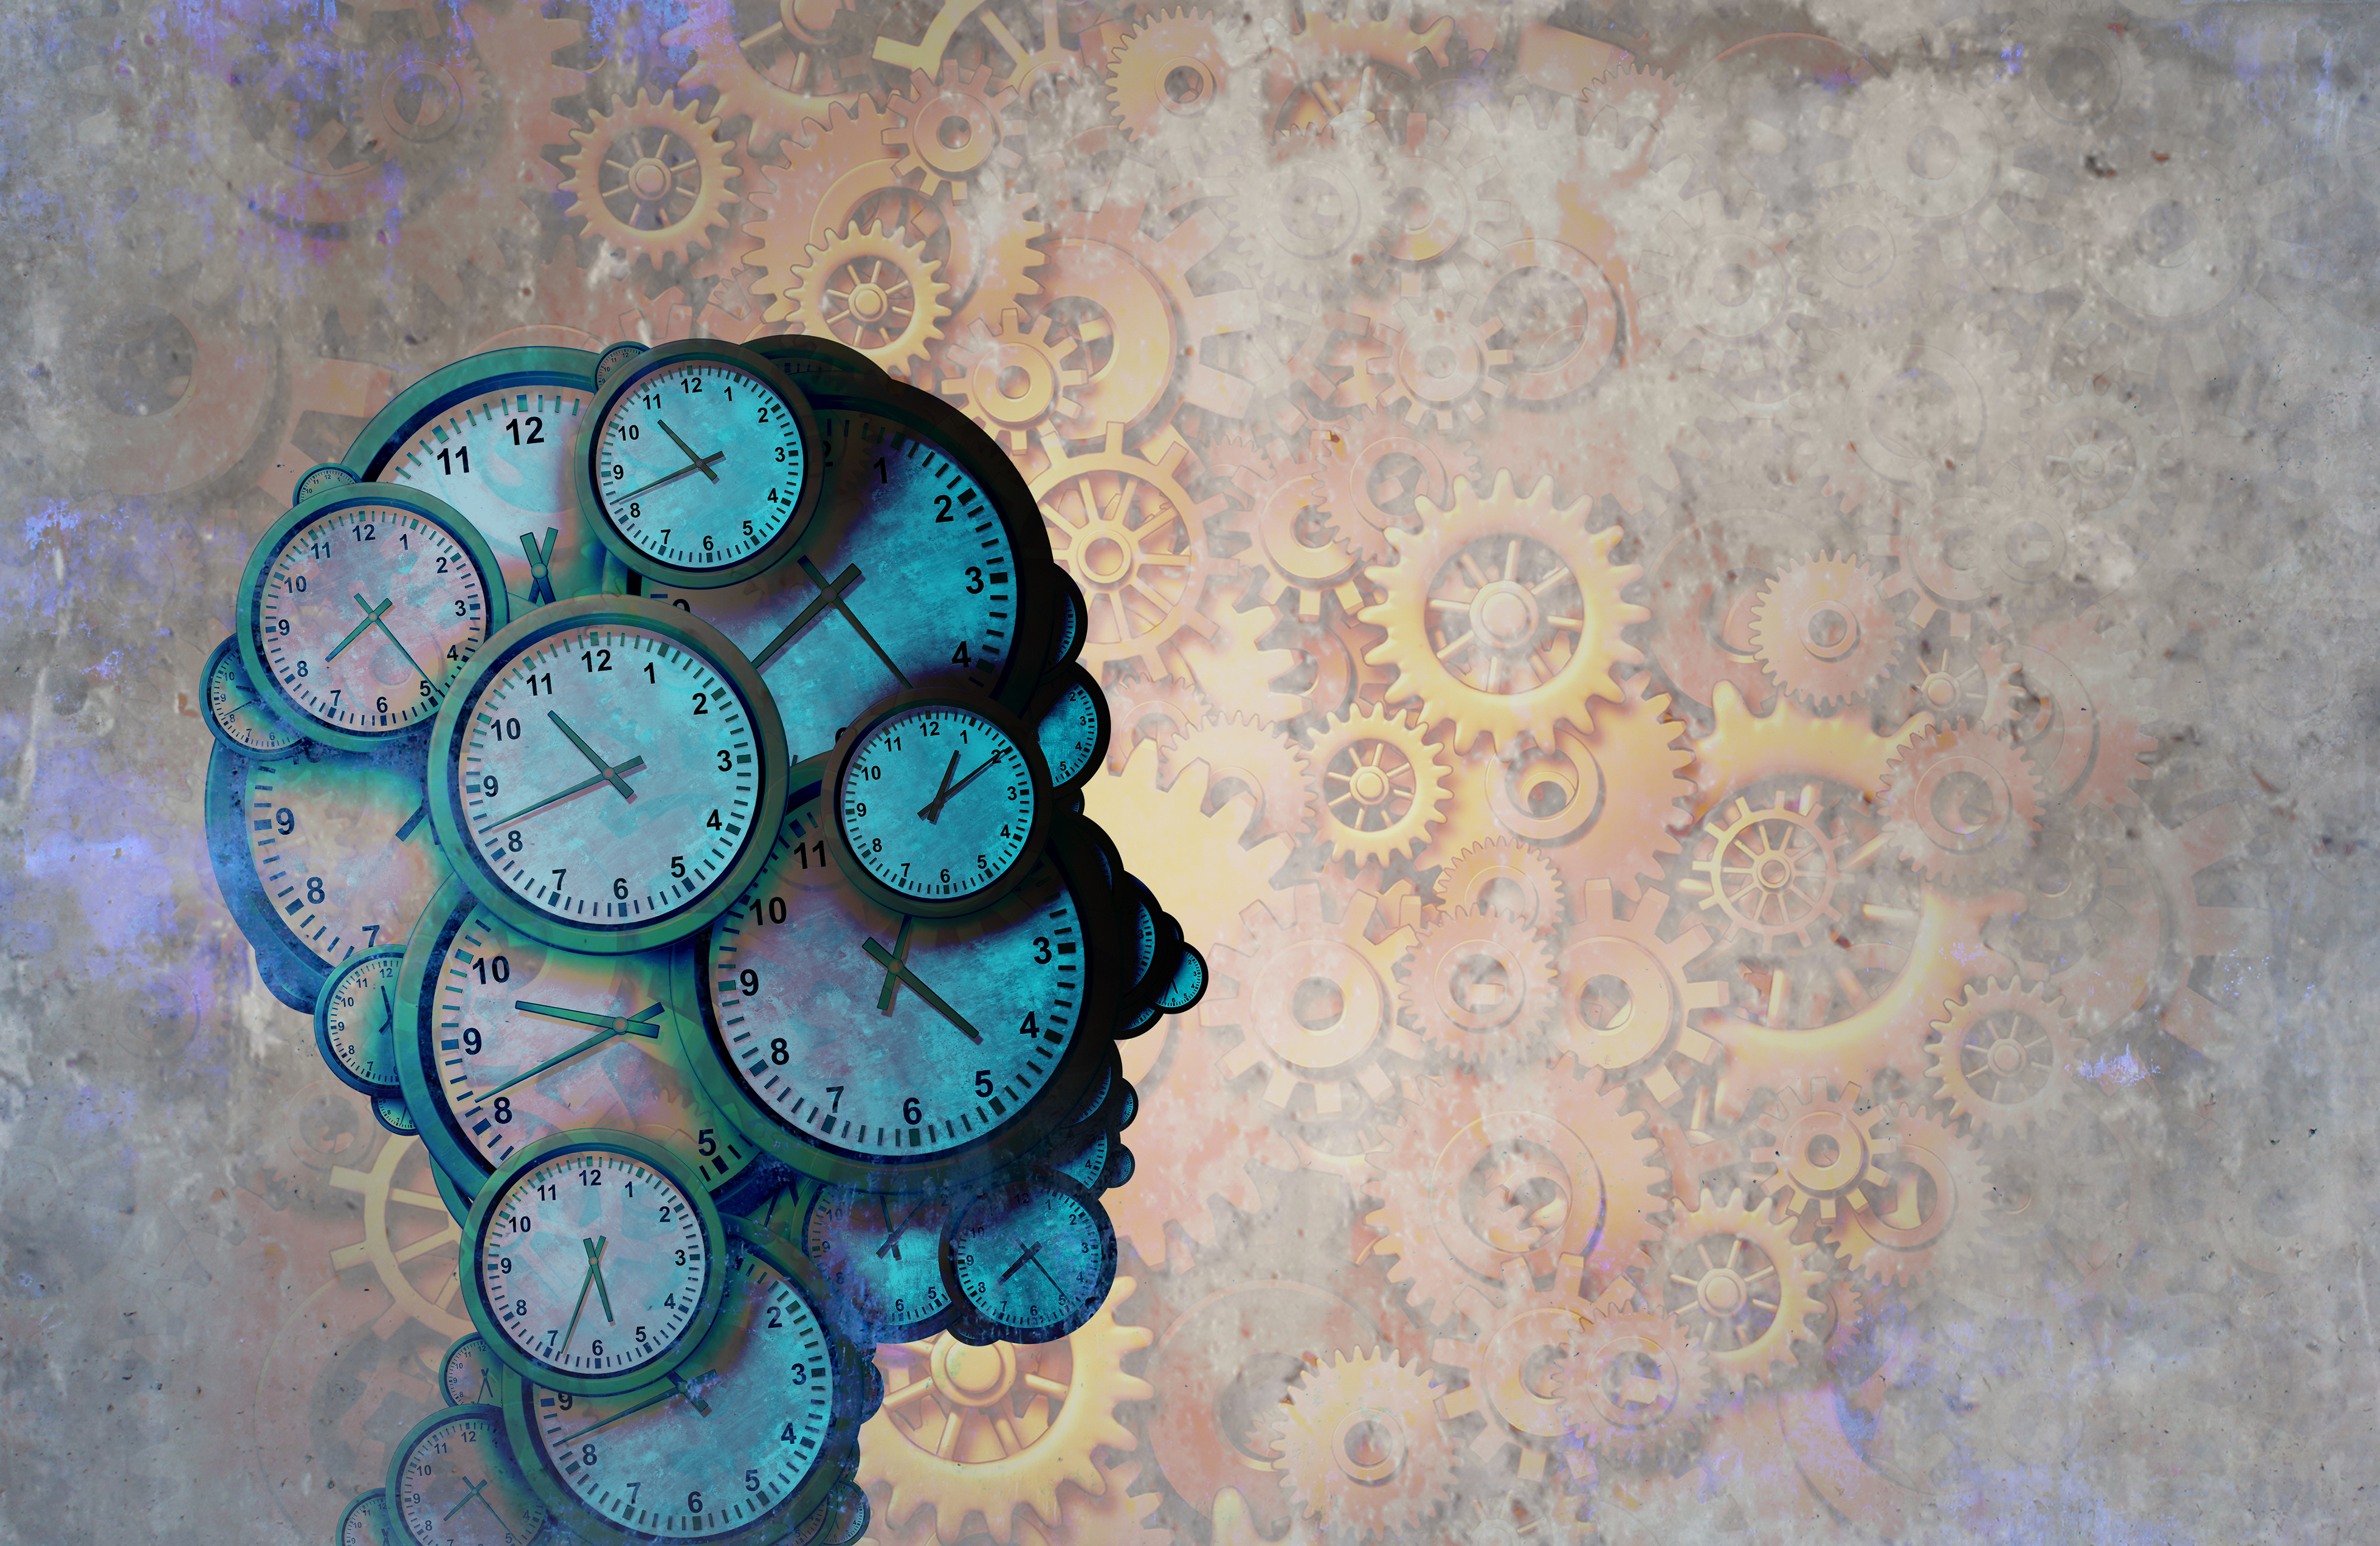 a graphic depiction of time with several timepieces representing a human head